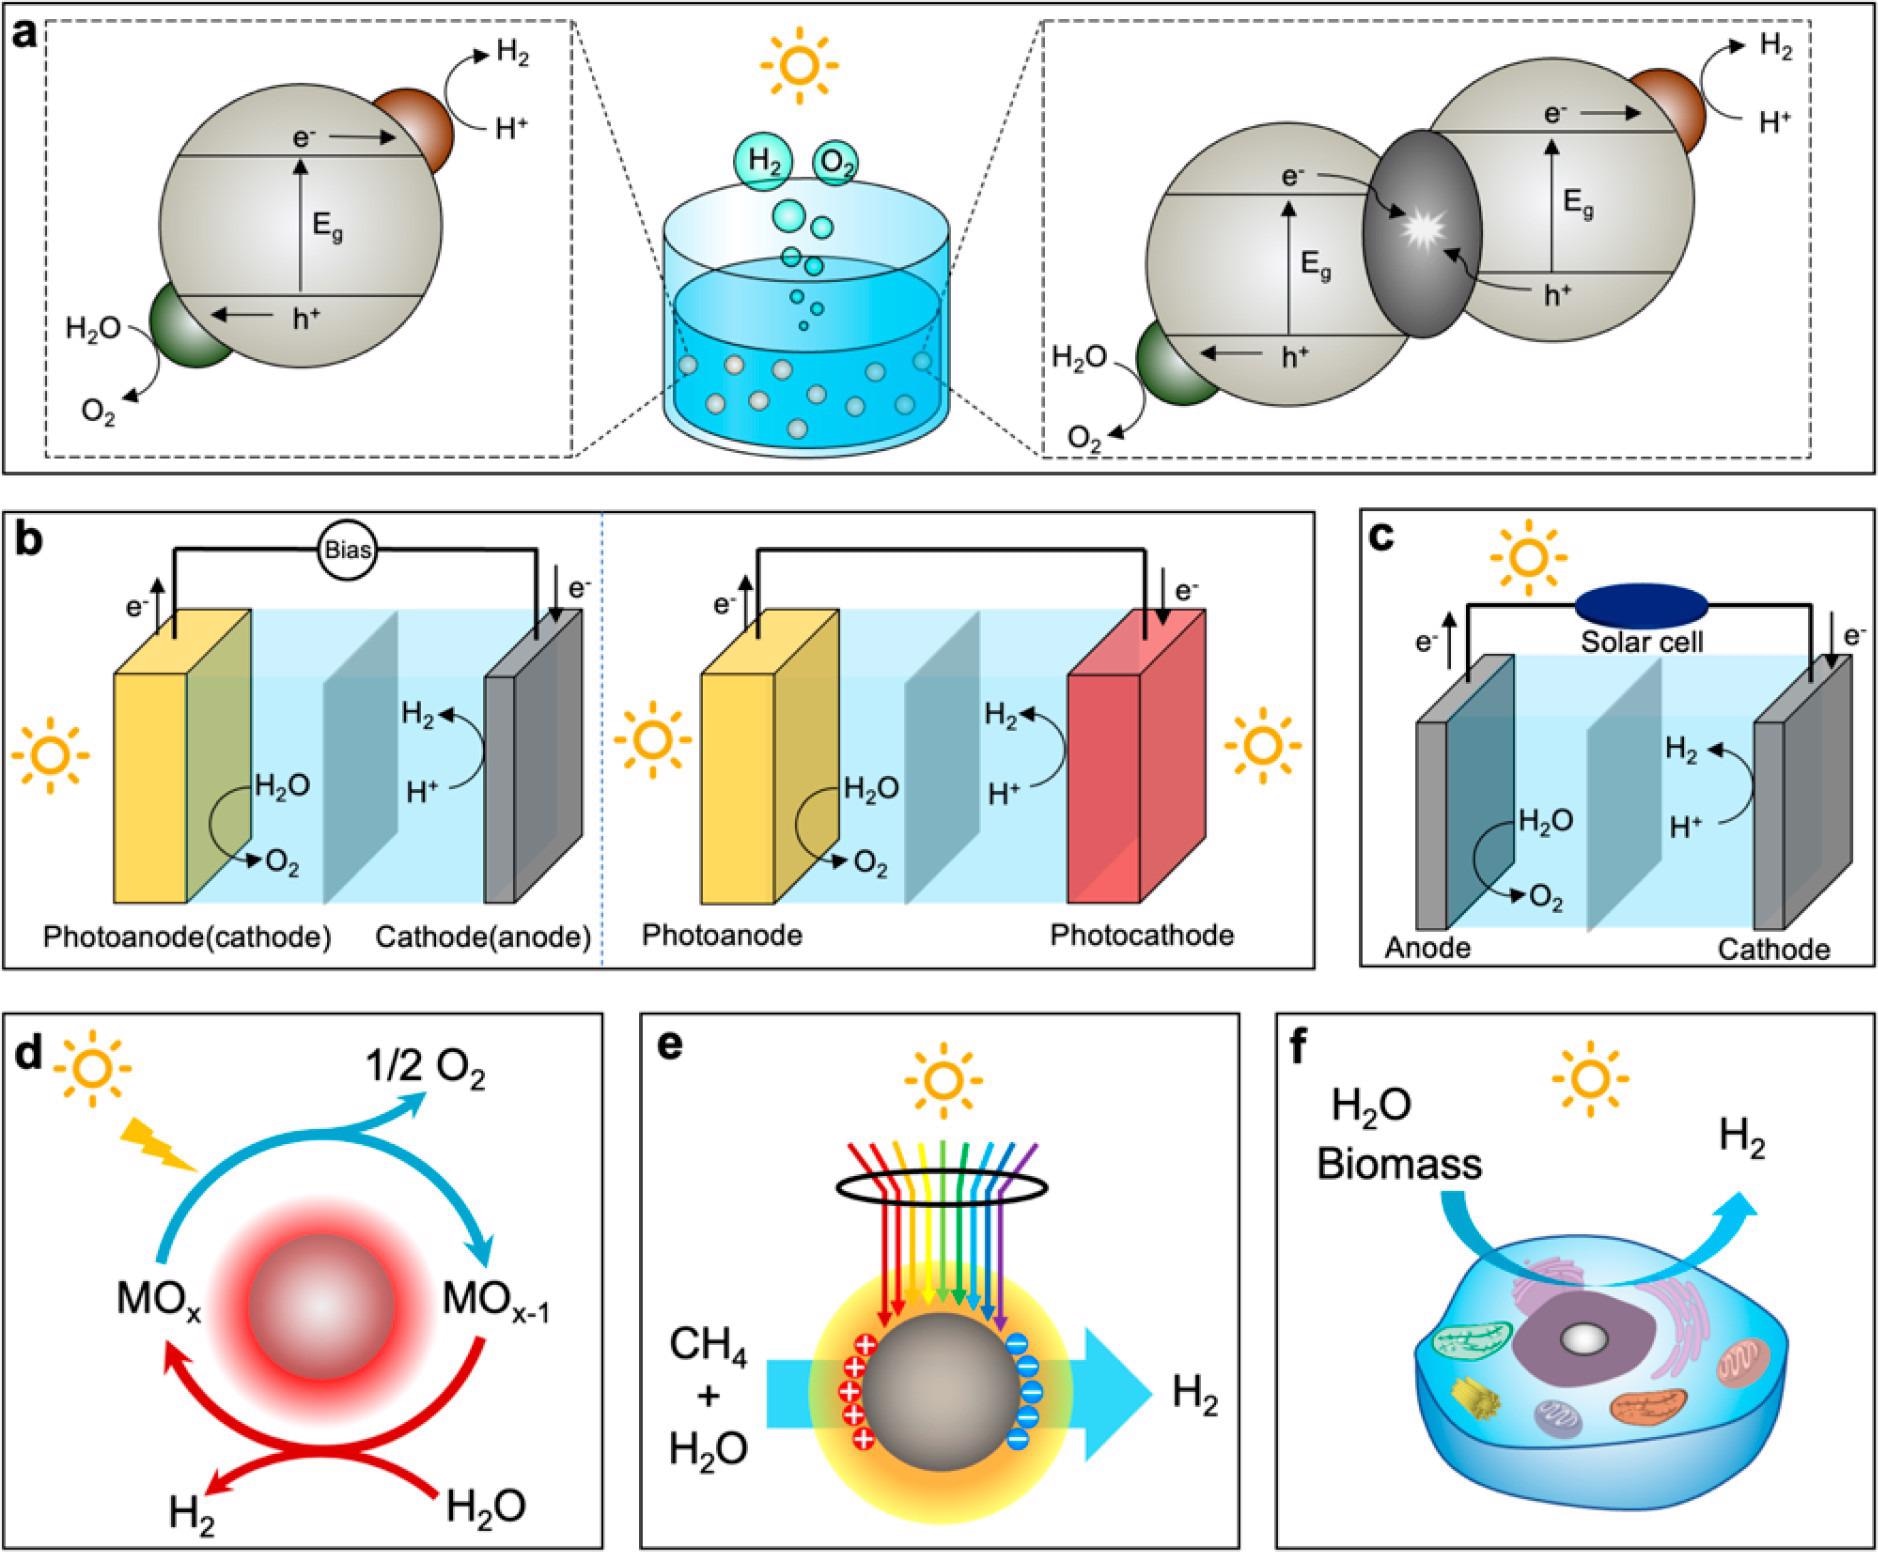 Various solar-driven H2 production approaches: (a) photocatalytic (PC) water splitting, (b) photoelectrochemical (PEC) water splitting, (c) photovoltaic–electrochemical (PV-EC) water splitting, (d) solar thermochemical (STC) water splitting, (e) photothermal catalytic (PTC) H2 production, and (f) photobiological (PB) H2 production.